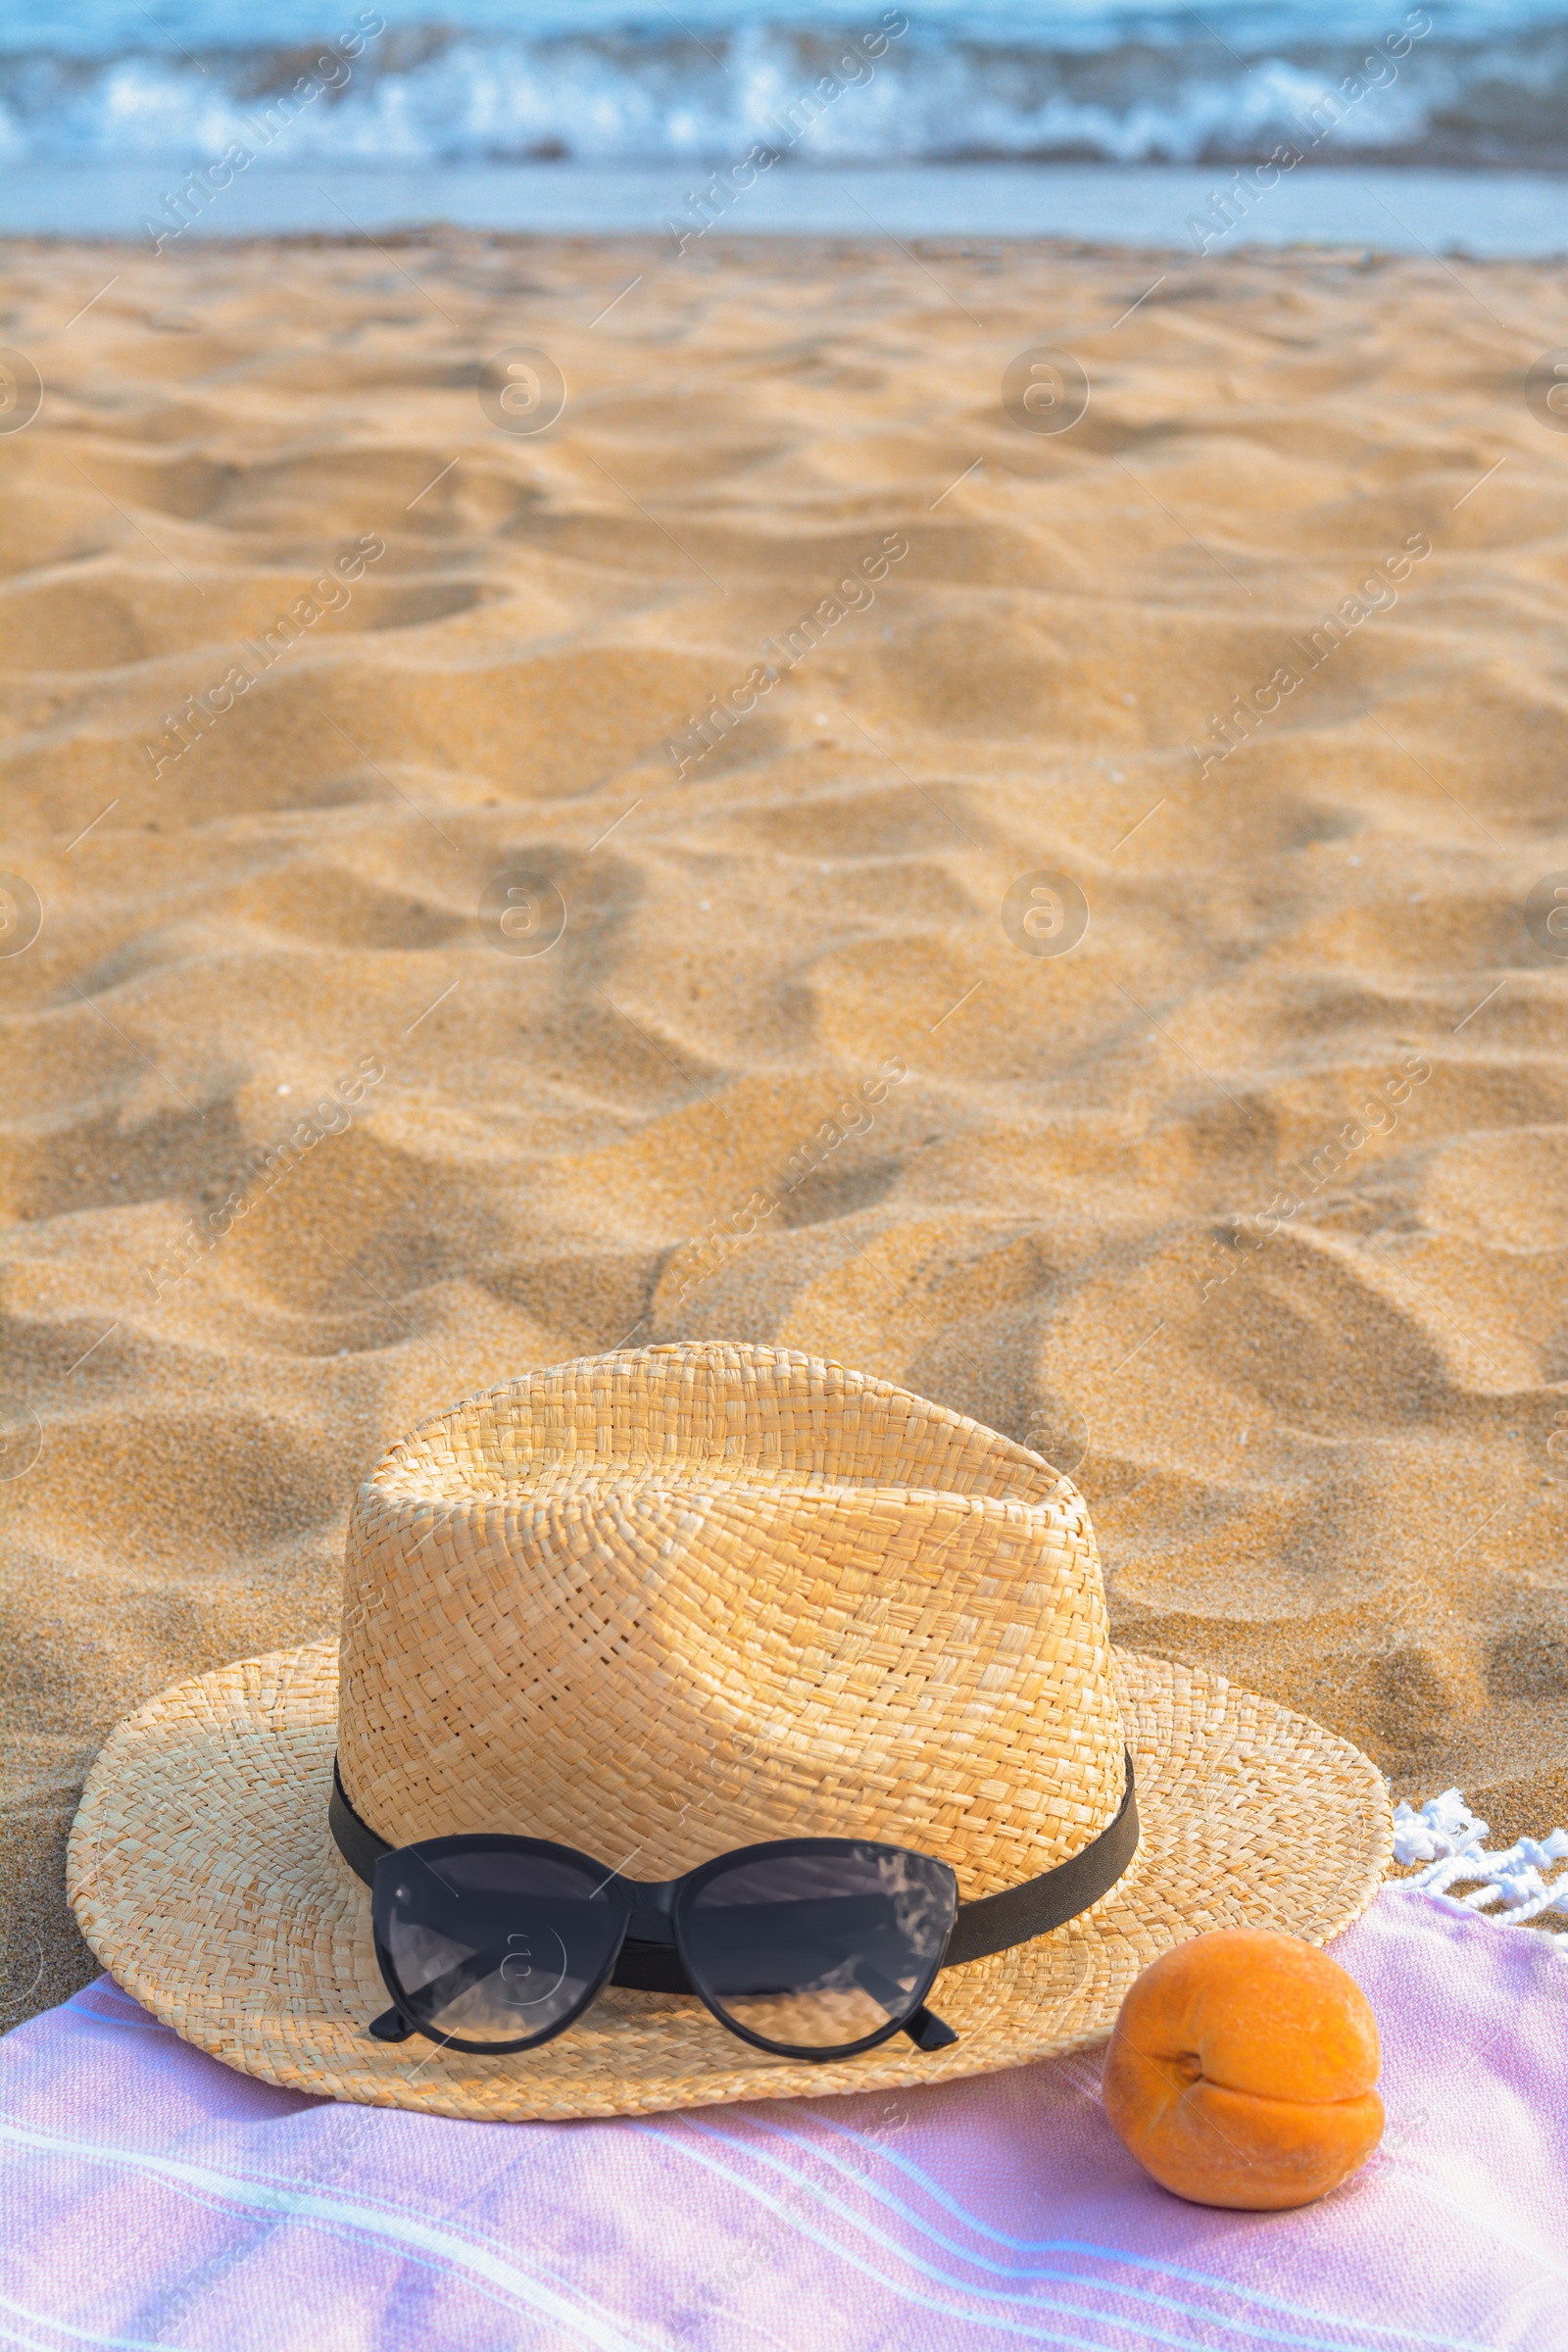 Photo of Hat with beautiful sunglasses and peach on sand near sea